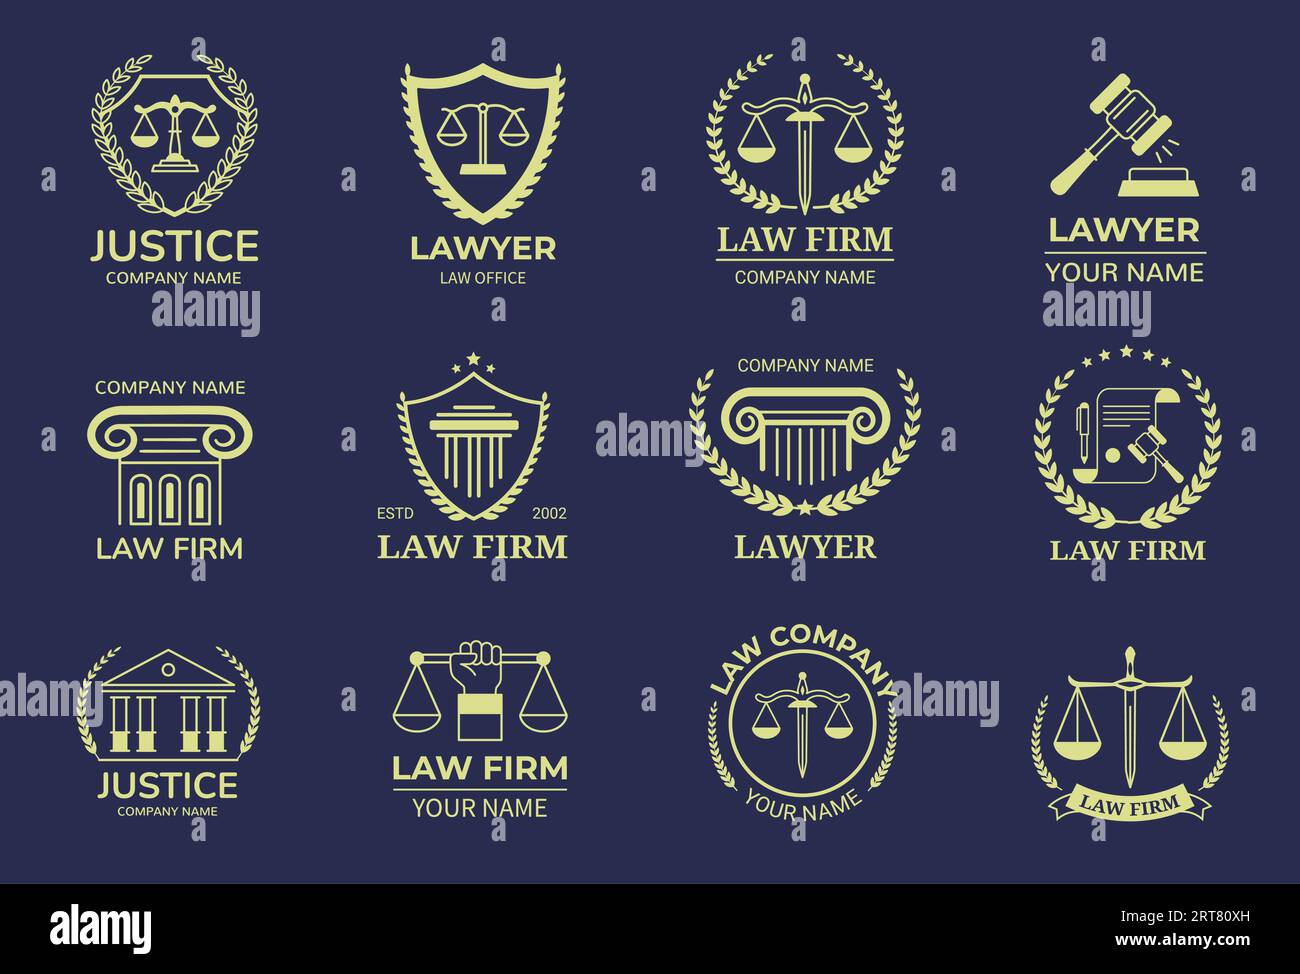 https://c8.alamy.com/comp/2RT80XH/law-emblems-lawyer-badge-template-with-scales-of-justice-judges-gavel-court-building-and-column-symbols-vector-set-2RT80XH.jpg